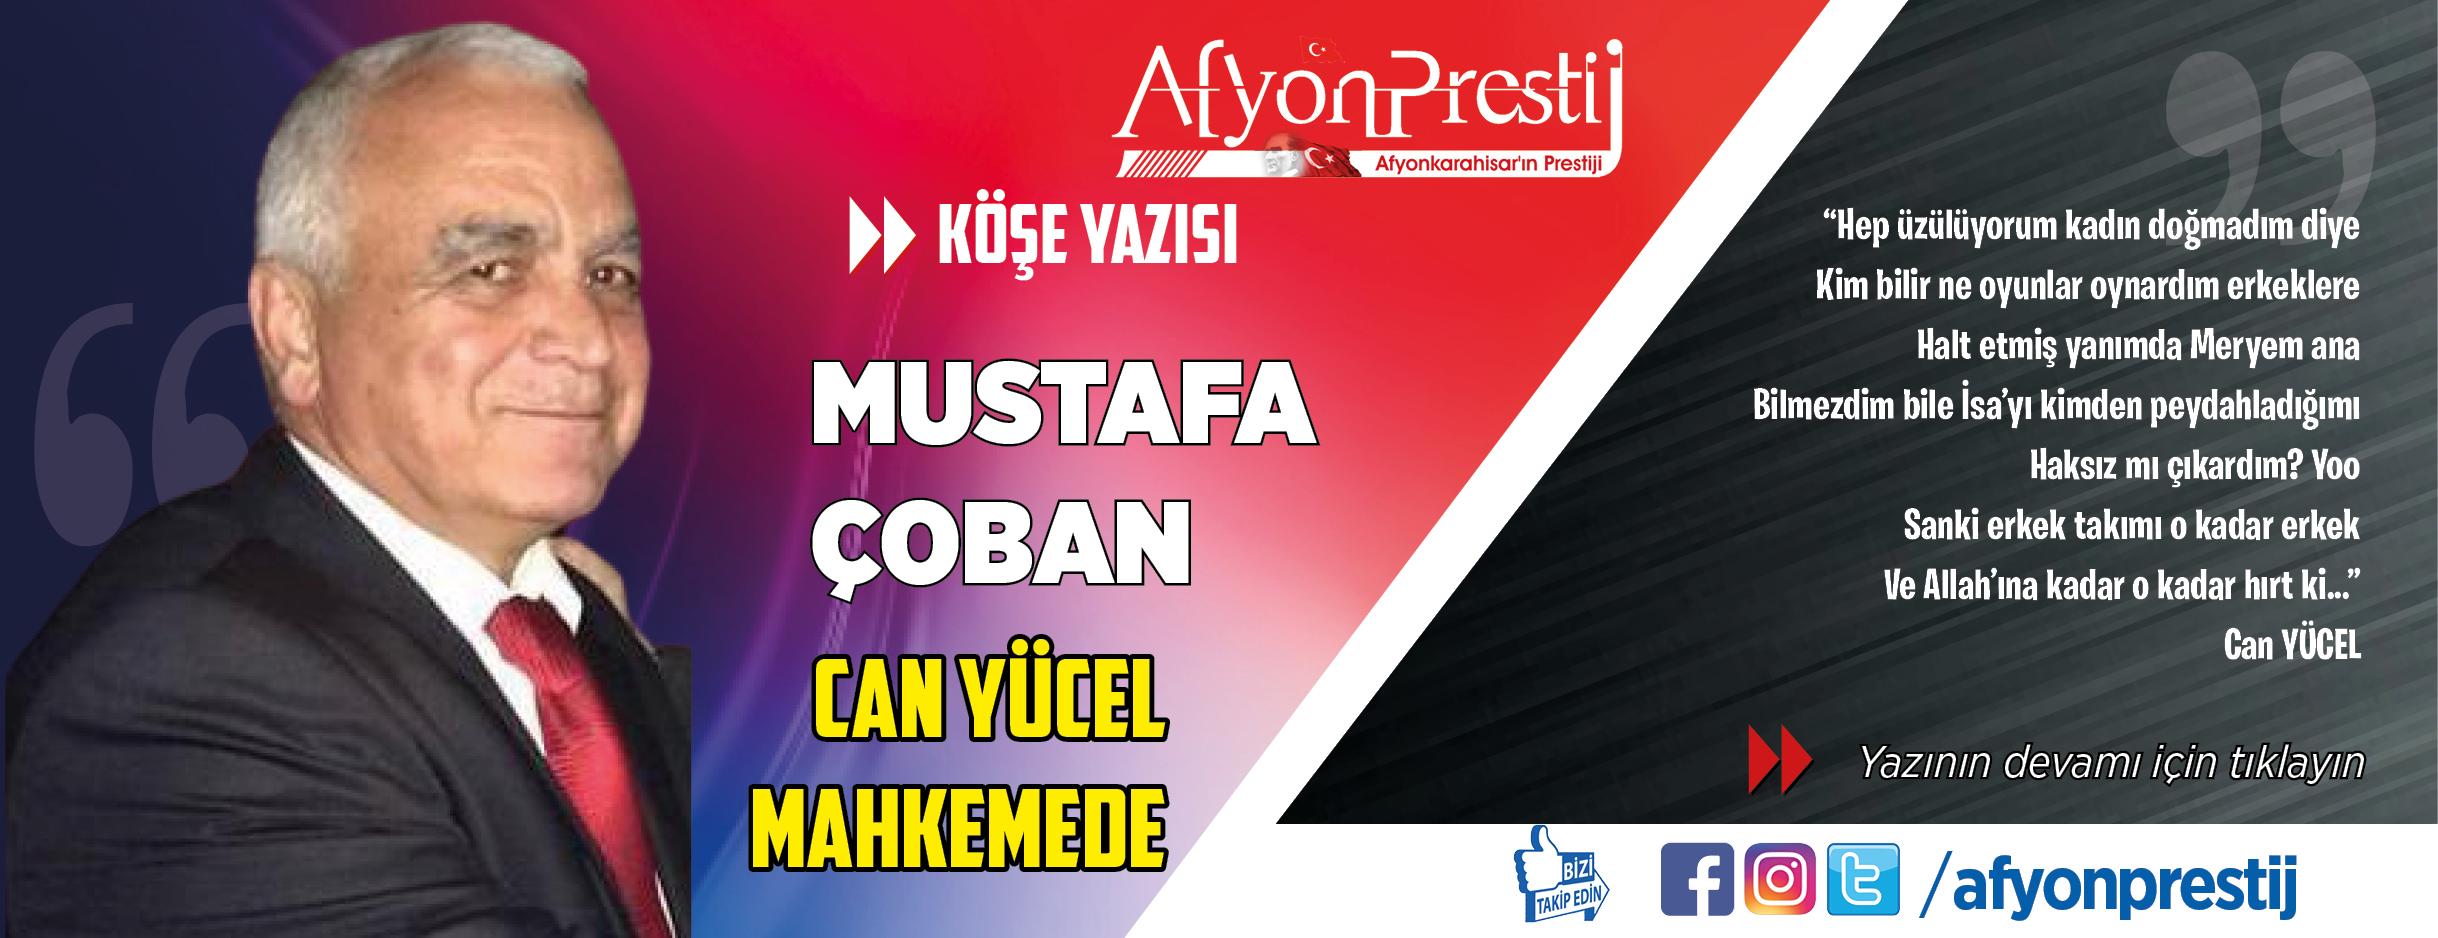 CAN YÜCEL MAHKEMEDE